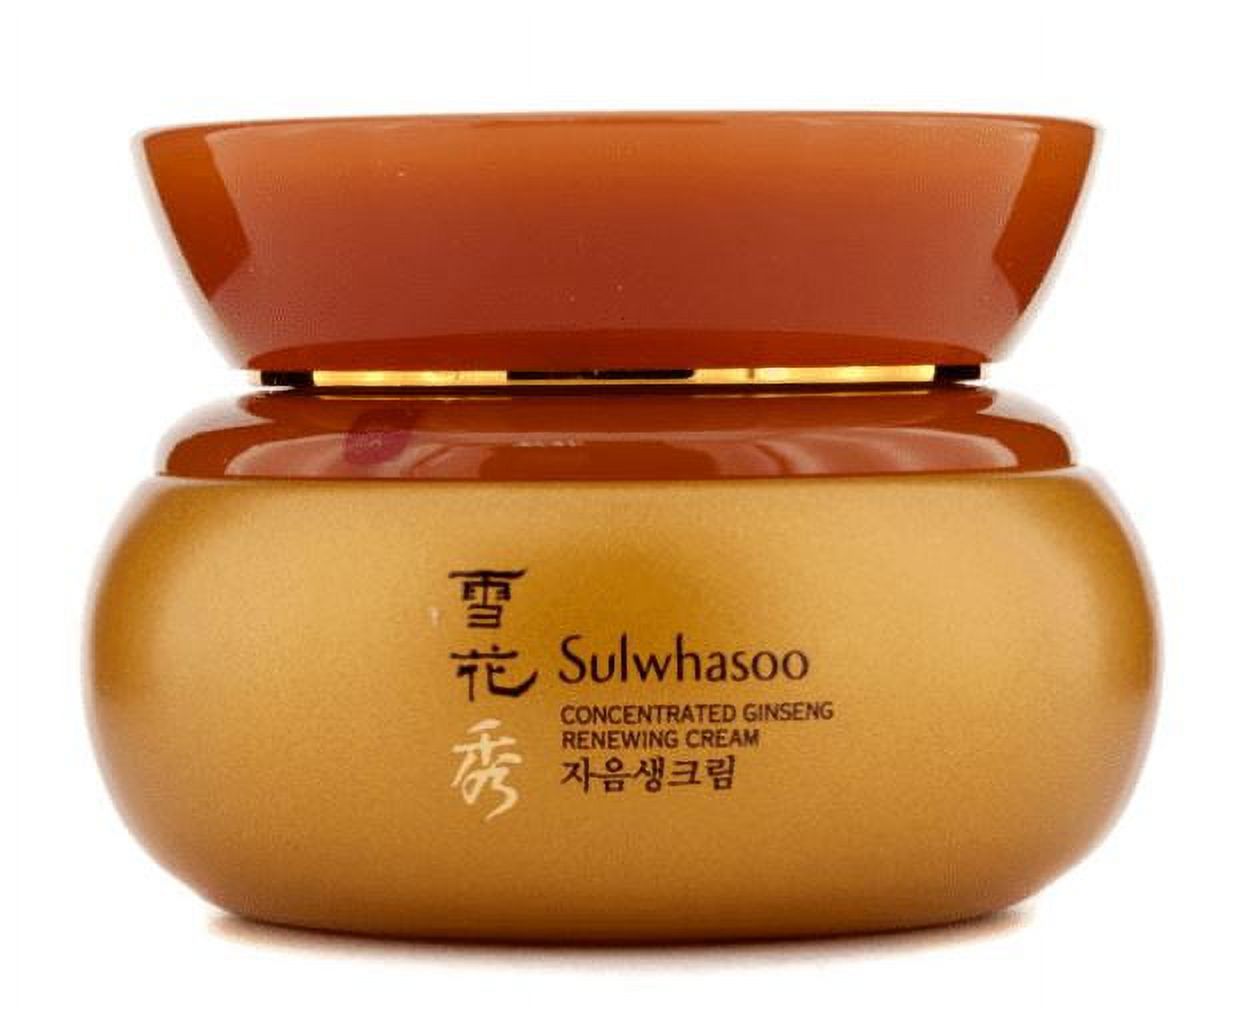 Sulwhasoo Concentrated Ginseng Renewing Facial Cream, 2.02 oz - image 1 of 3